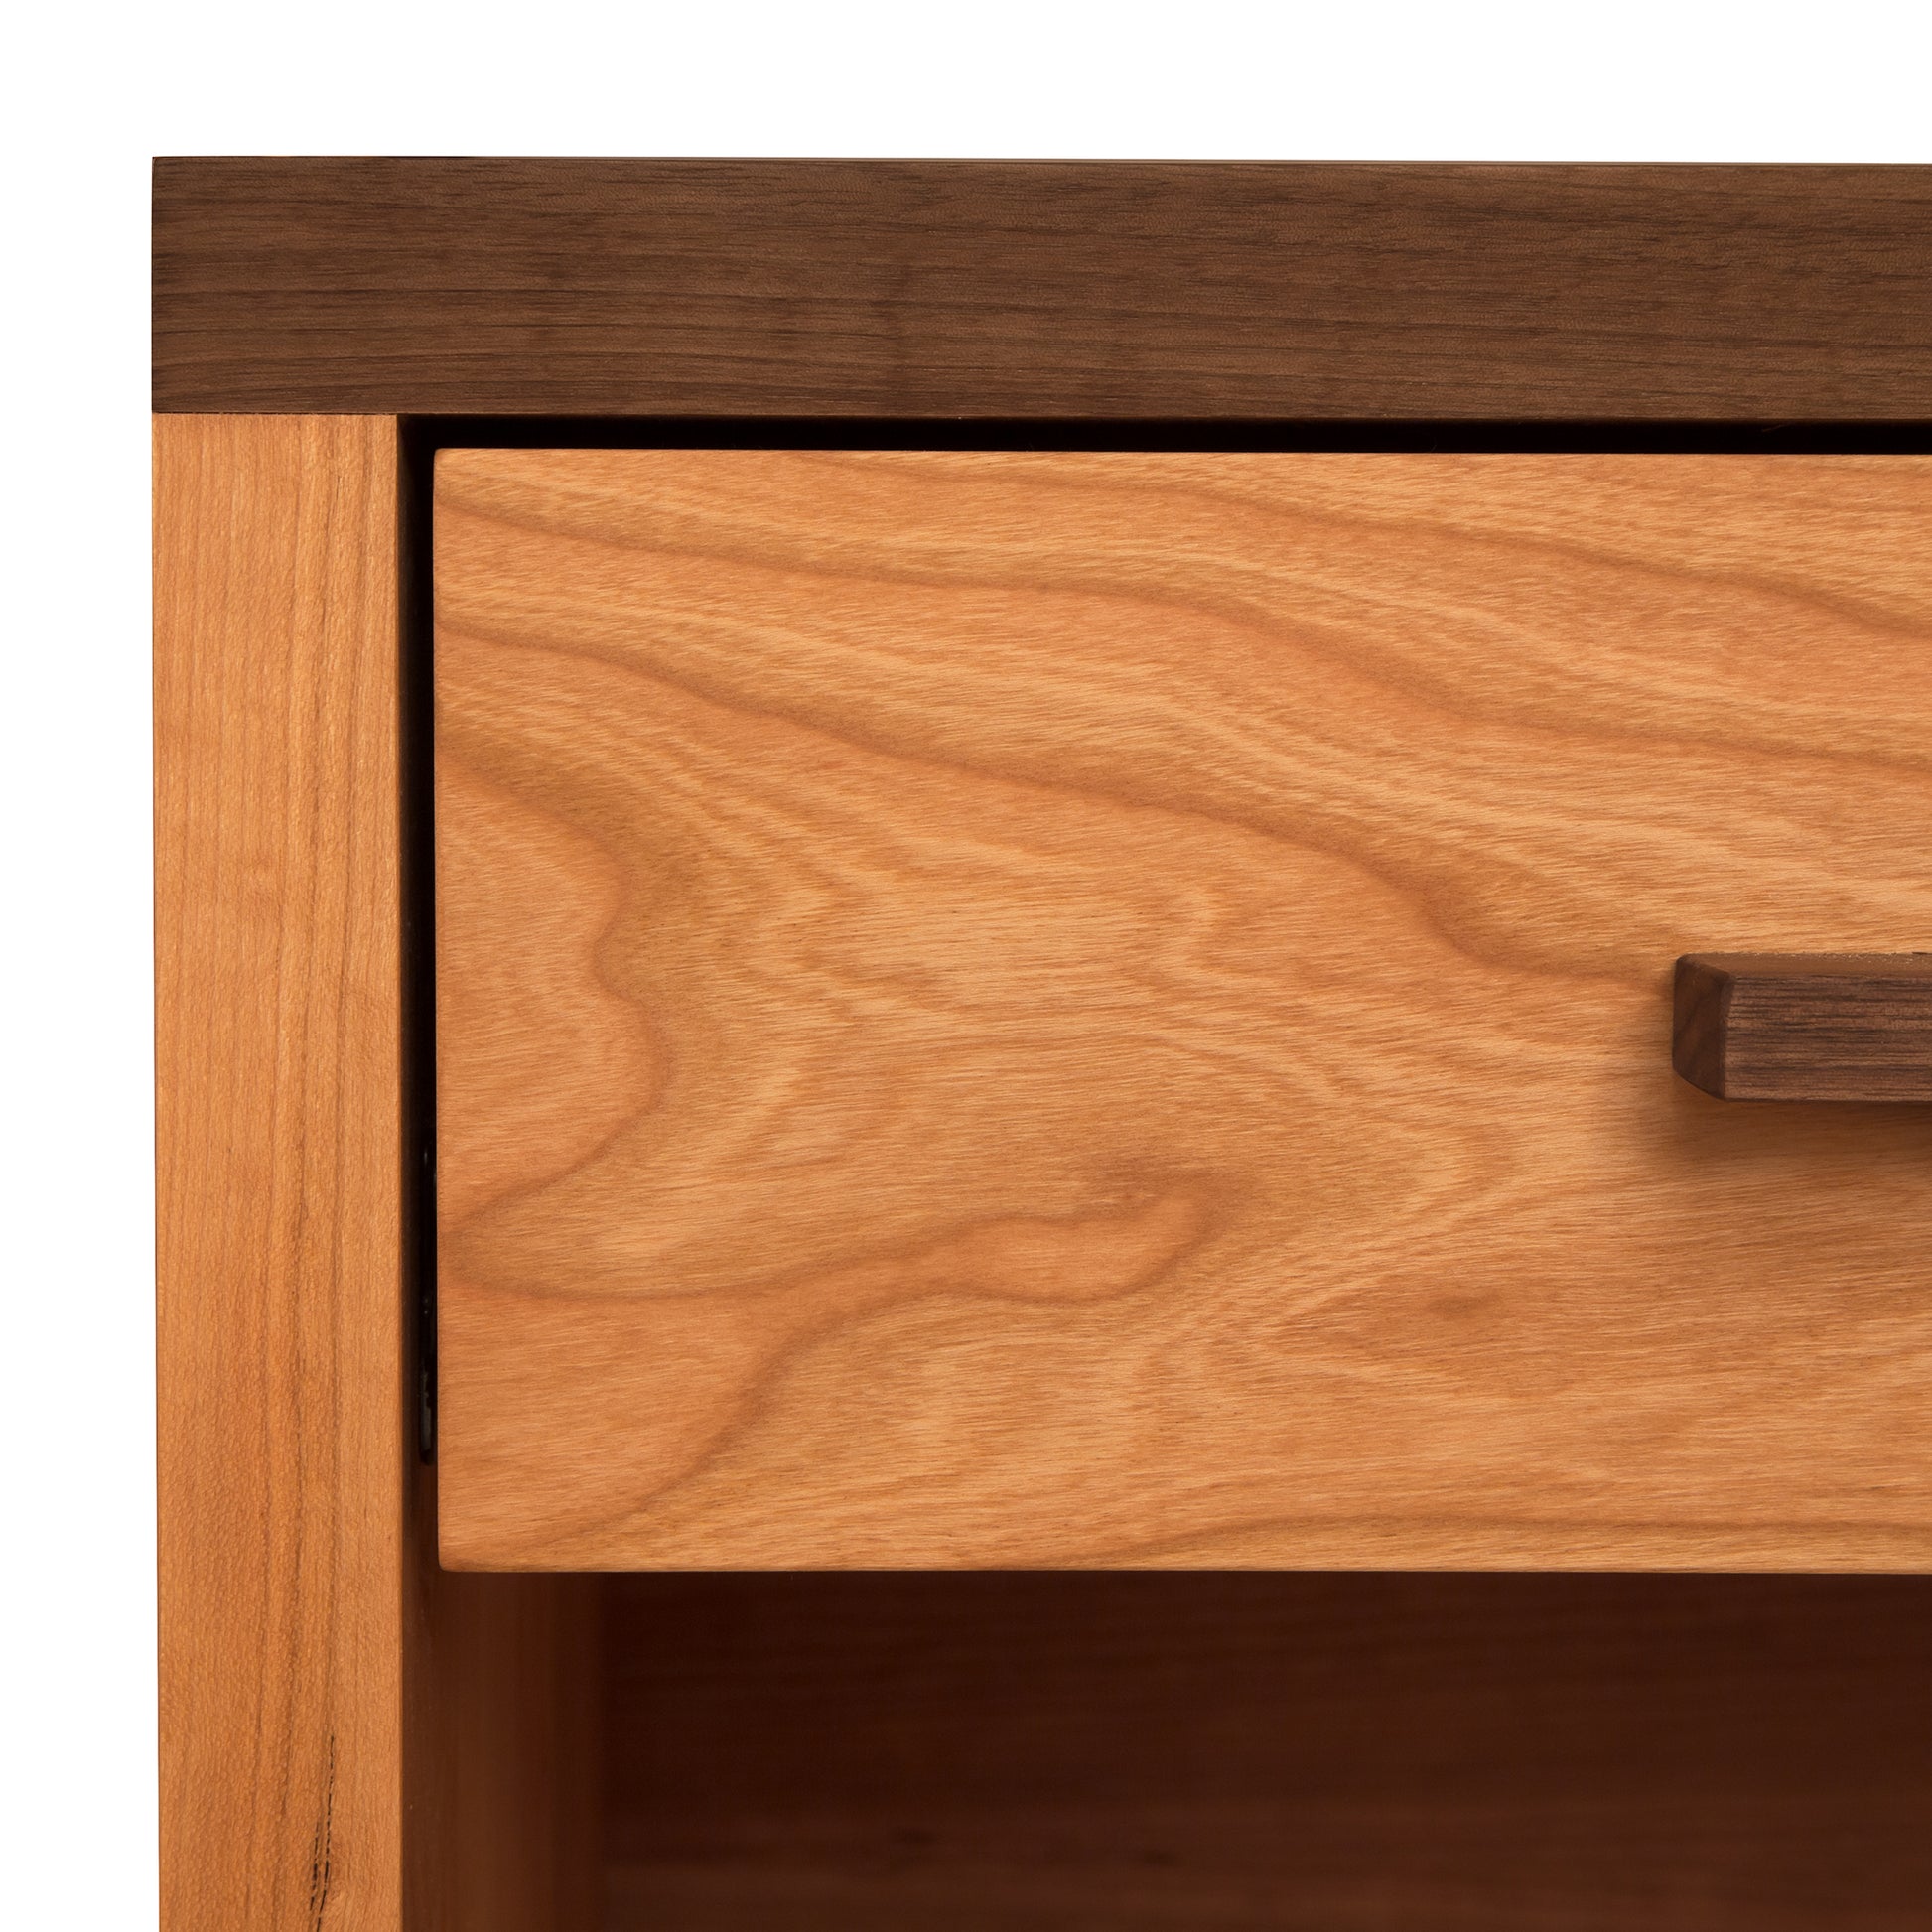 Close-up image of a Vermont Furniture Designs Modern American 1-Drawer Enclosed Shelf Wide Nightstand drawer slightly open, showing the detailed wood grain and texture on the drawer face with a simple horizontal pull handle. The outer frame has a darker wood tone.